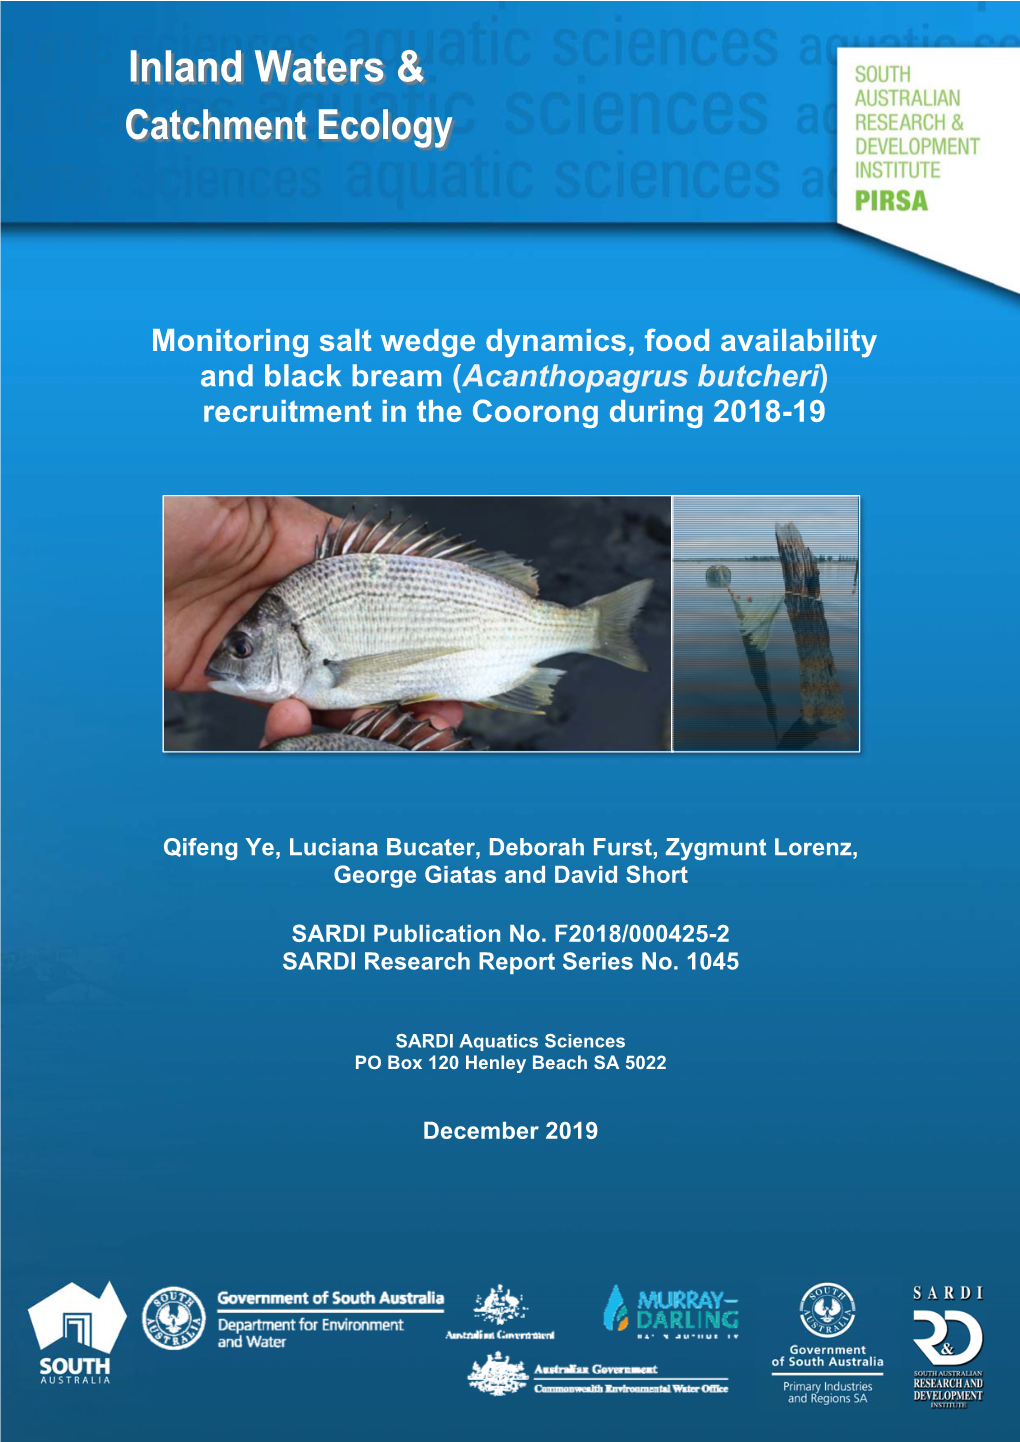 Monitoring Salt Wedge Dynamics, Food Availability and Black Bream (Acanthopagrus Butcheri) Recruitment in the Coorong During 2018-19